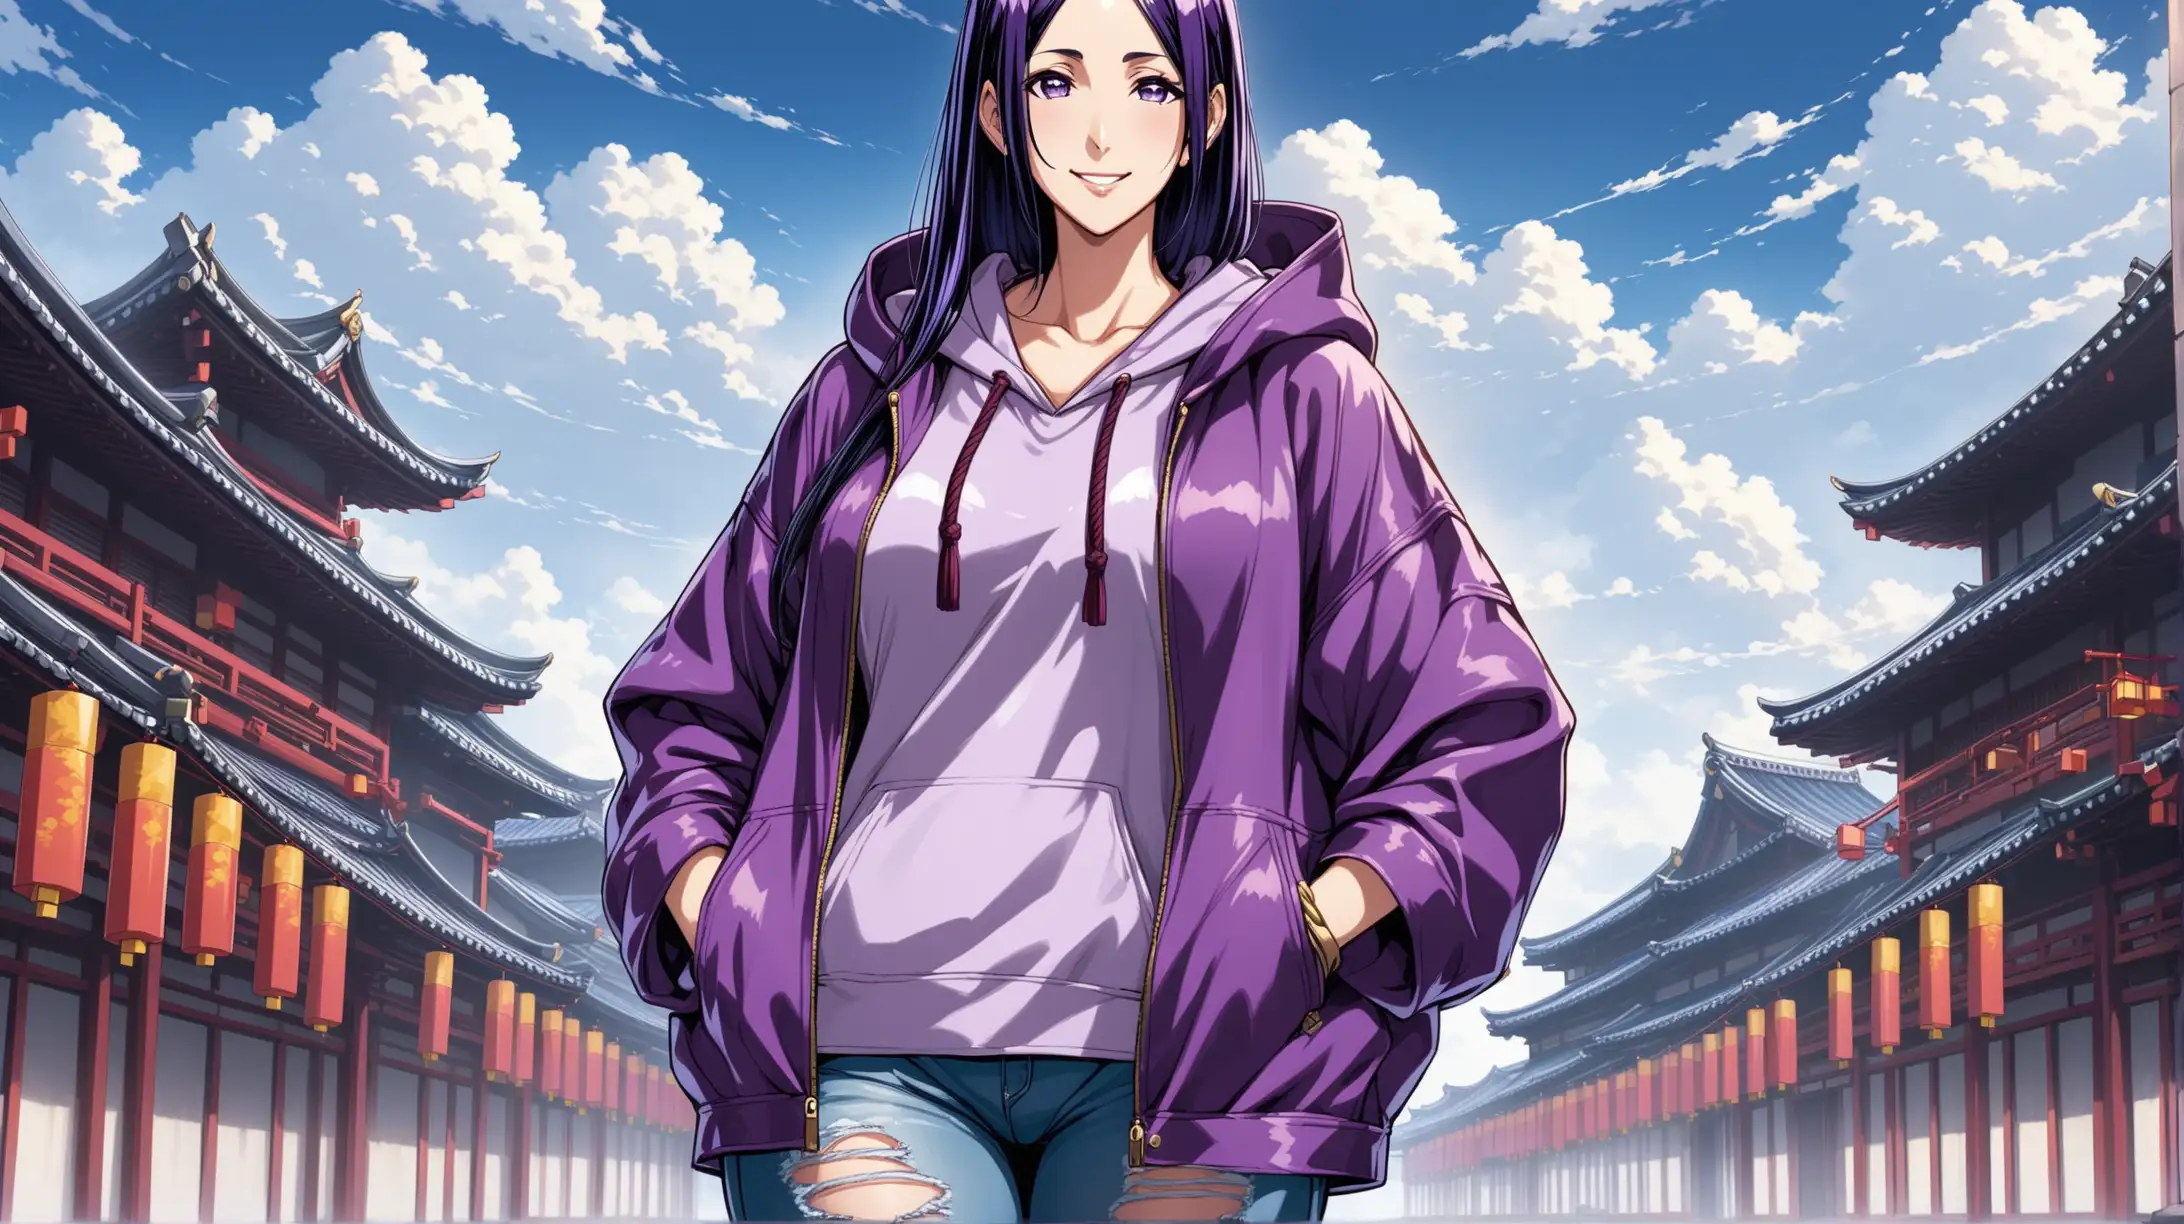 Minamoto no Raikou Smiling Outdoors in Ripped Jeans and Hooded Jacket on Cloudy Day